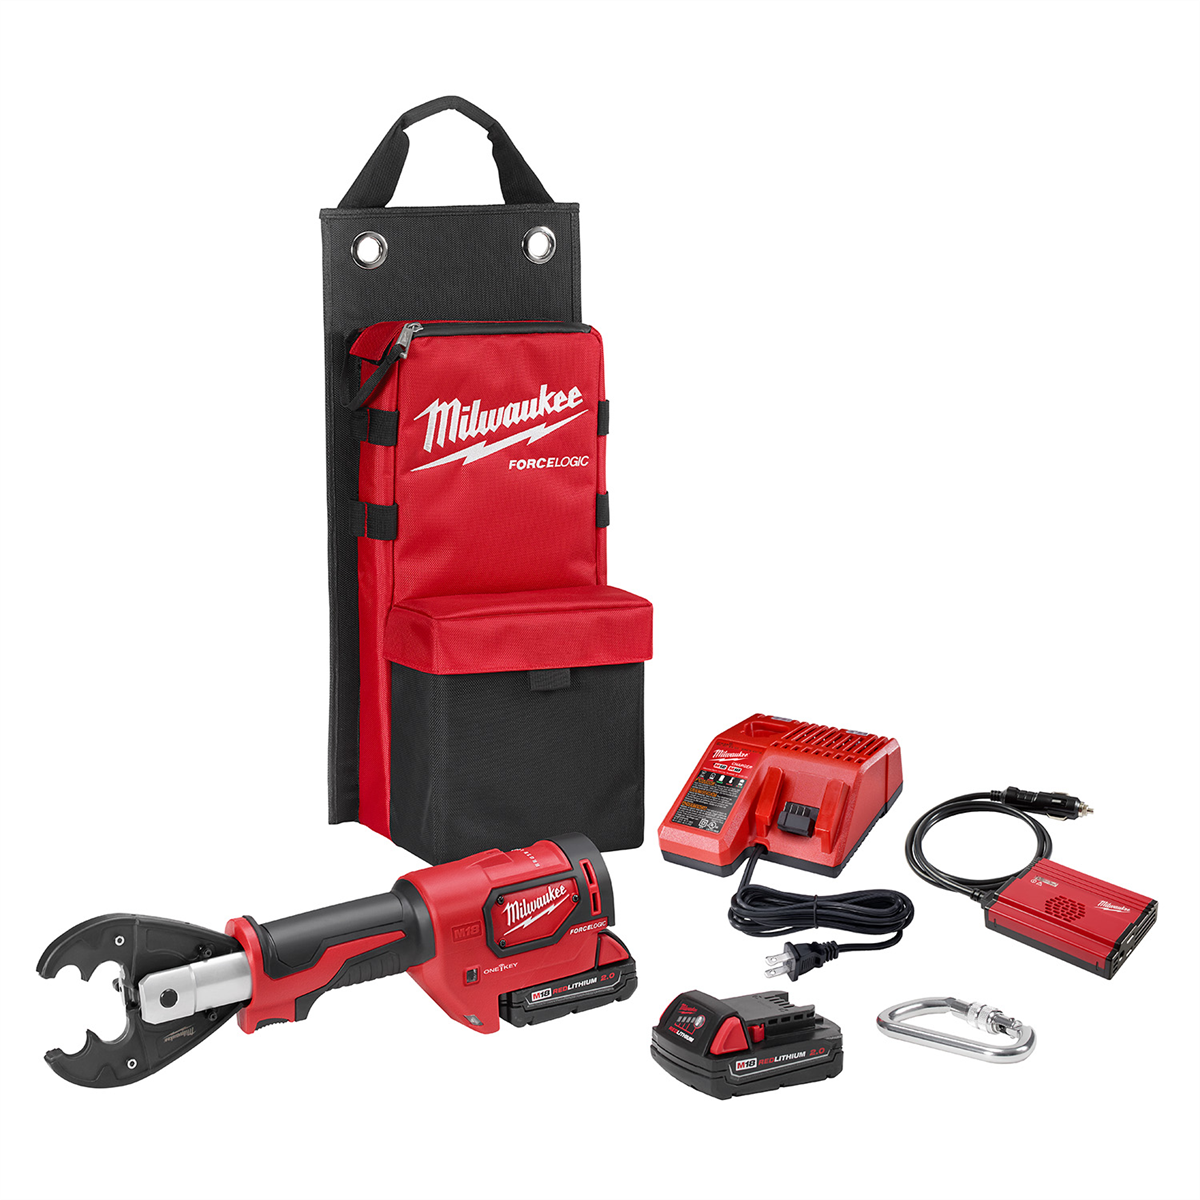 M18FORCE LOGIC 6T Utility Crimper Kit with D3 Grooves and Fixed